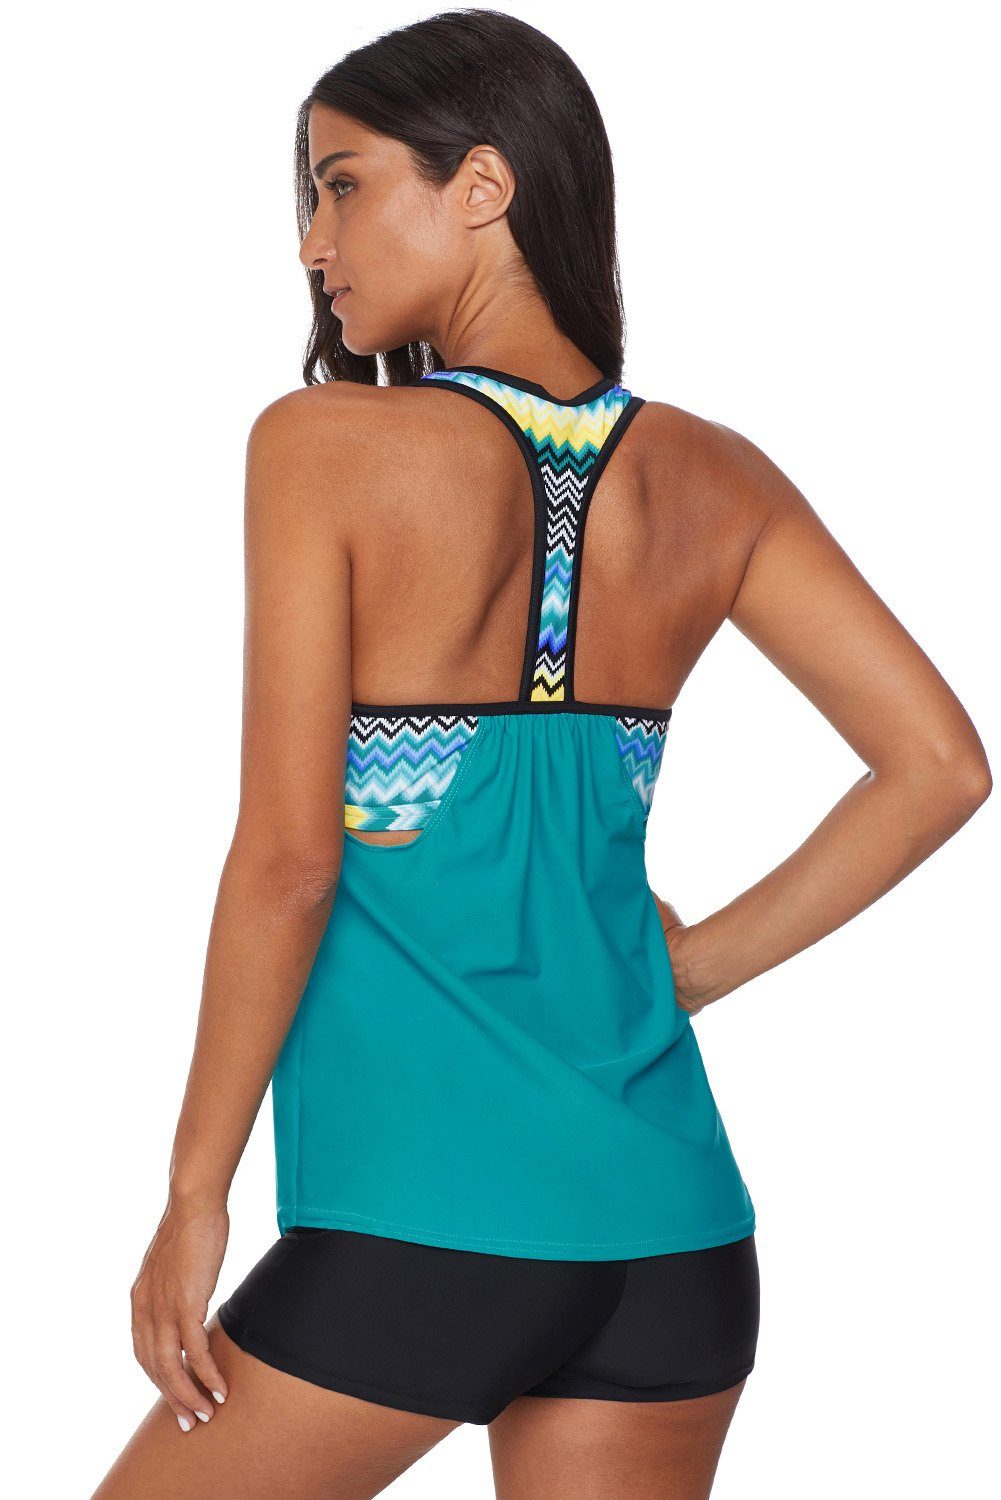 KaleaBoutique Green Blouson Striped Printed Strappy T-Back Push up Tankini Top - KaleaBoutique.com